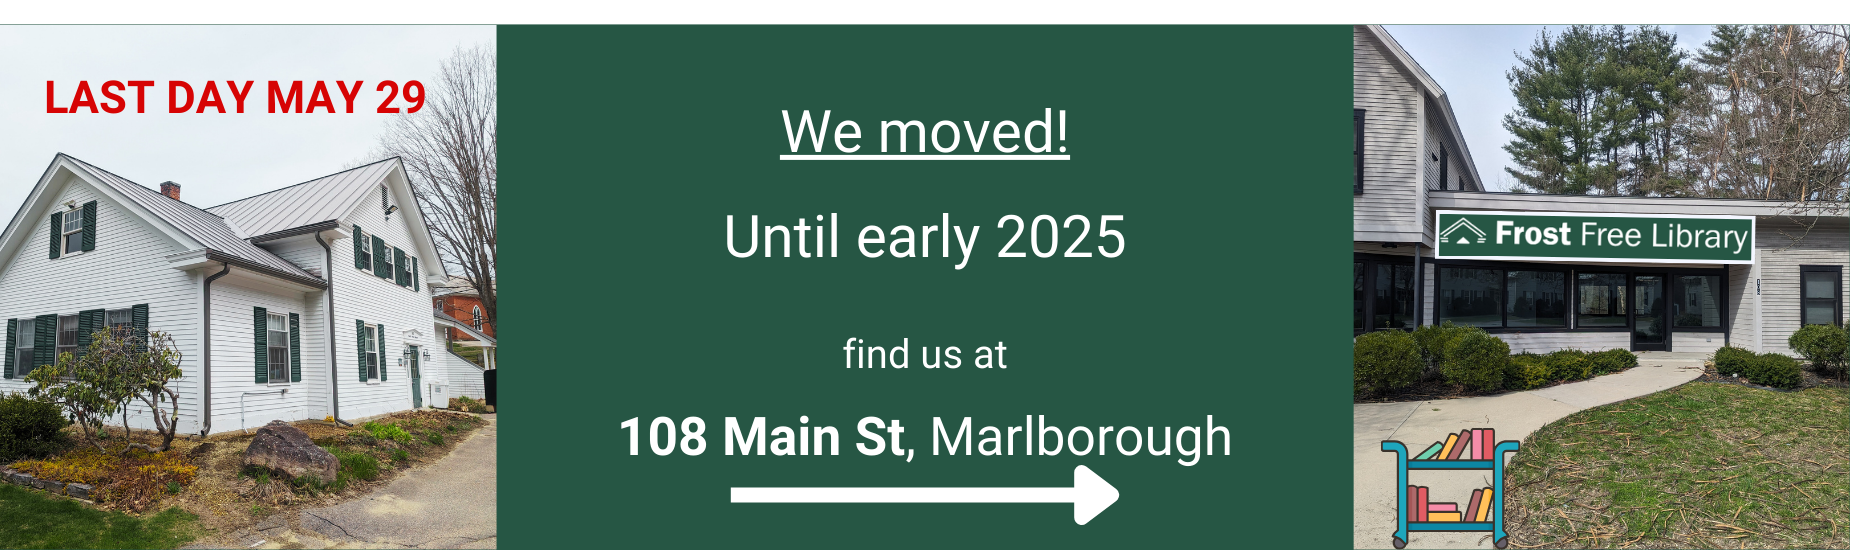 We moved to 108 Main St!